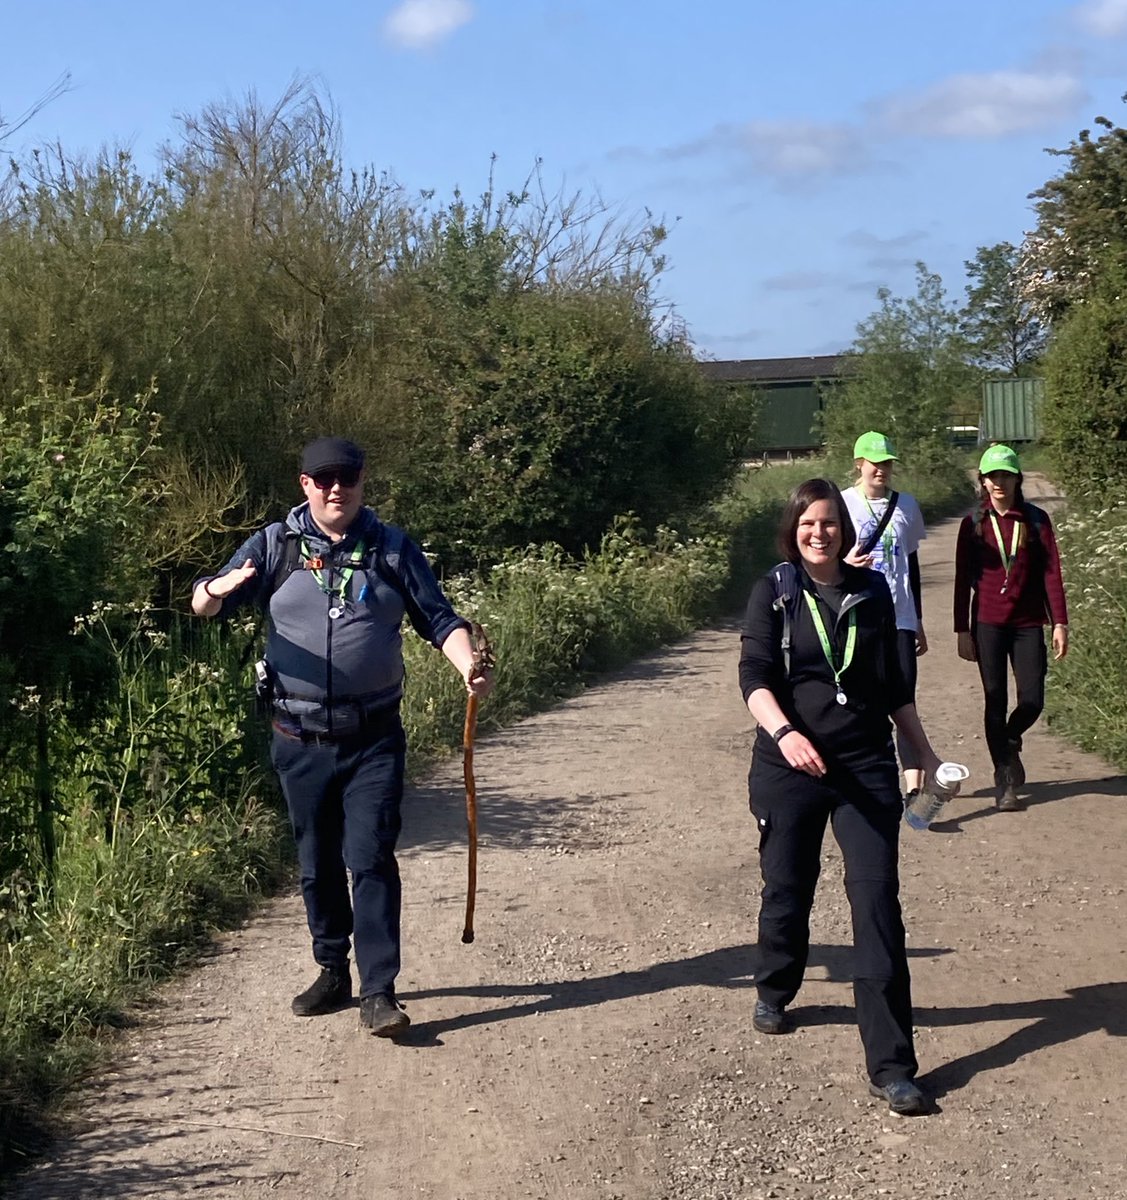 TOMORROW @gbrannanarchive and I will be taking on The Great York Walk 2024 in aid of Mentally Fit York. 2 archivists, 25 miles, a warm weather forecast... What could possibly go wrong?! If you can donate to this amazing cause I'd be so grateful: yustart.hubbub.net/p/lauray-walks….